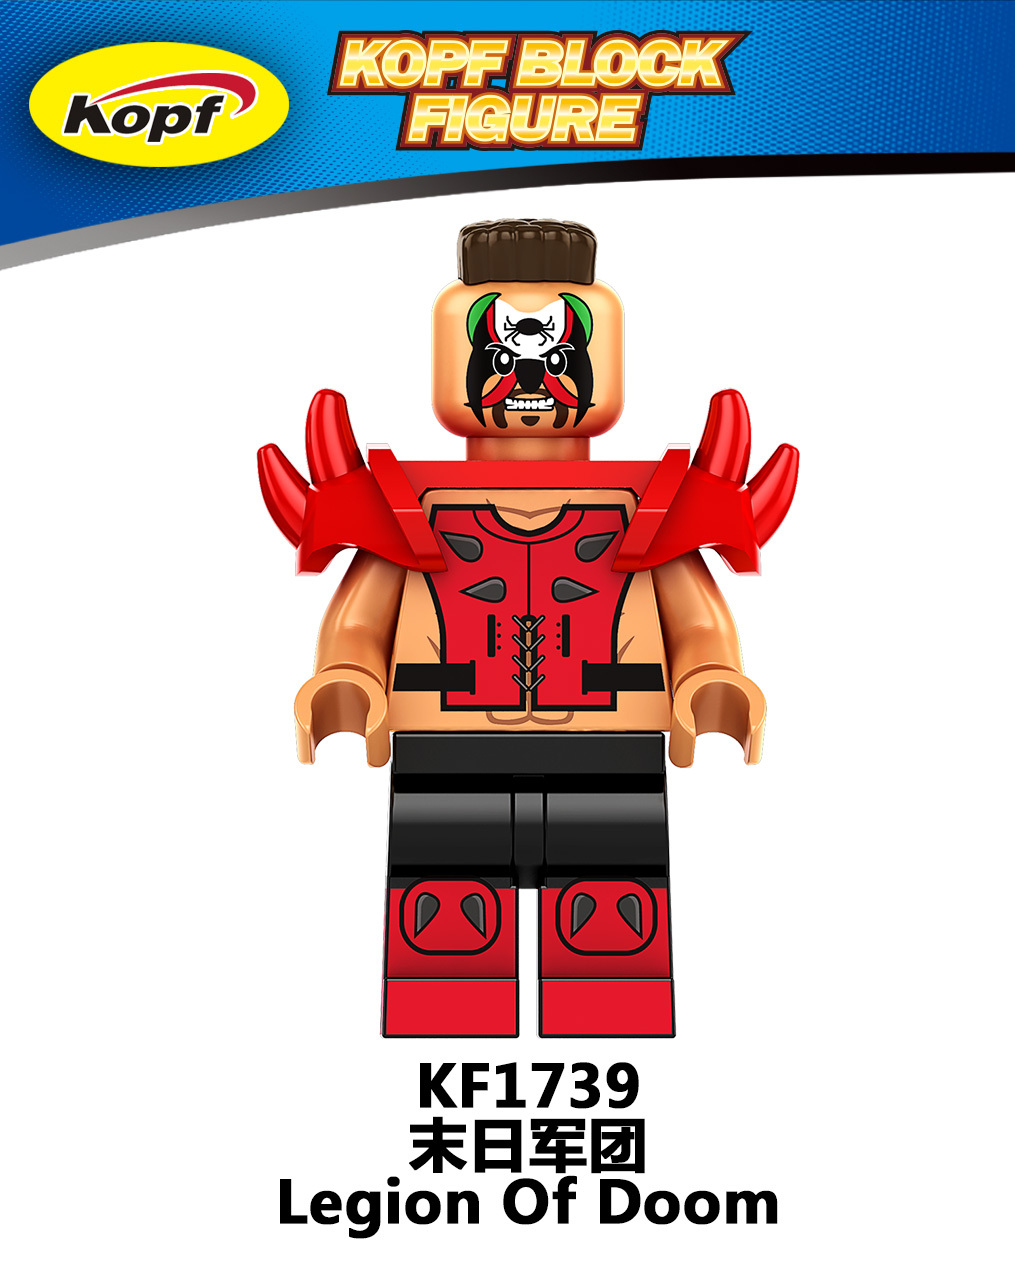 KF6164 KF1736 KF1737 KF1738 KF1739 KF1740 KF1741 KF1742 KF1743 Wrestling Superstar Movie Series Mini Building Blocks  Action Figures Educational Toys For Kids Gifts